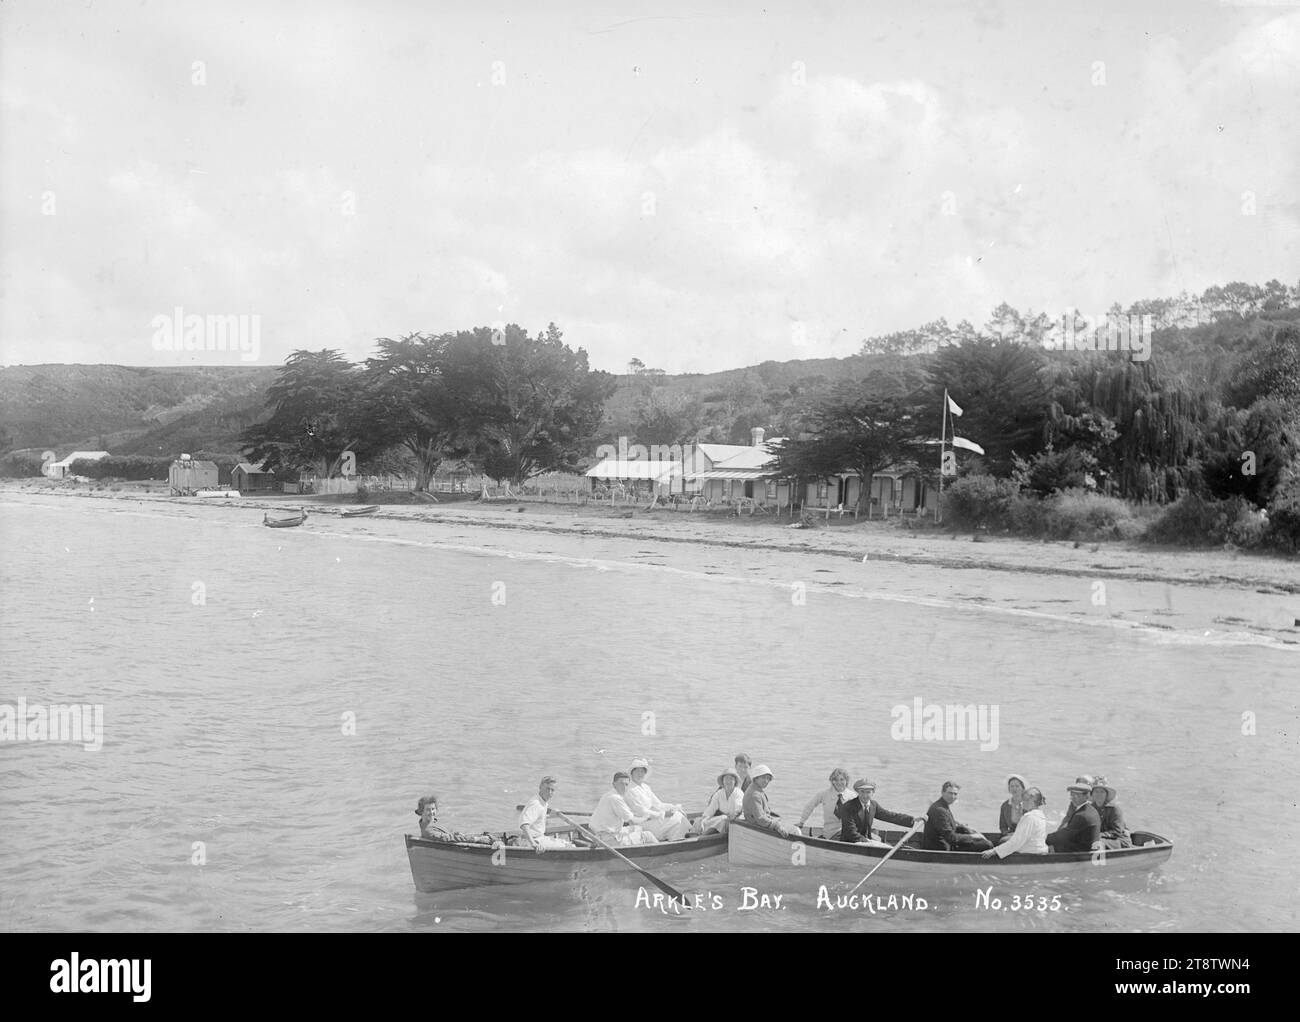 Row boats at Arkles Bay, Auckland, New Zealand, Two boat loads of people rowing in Arkles Bay in front of Arkle's Bay House. A flagpole can be seen on the right of Arkle's Bay House. Taken in early 1900s (possibly from the jetty at the north end of the bay Stock Photo